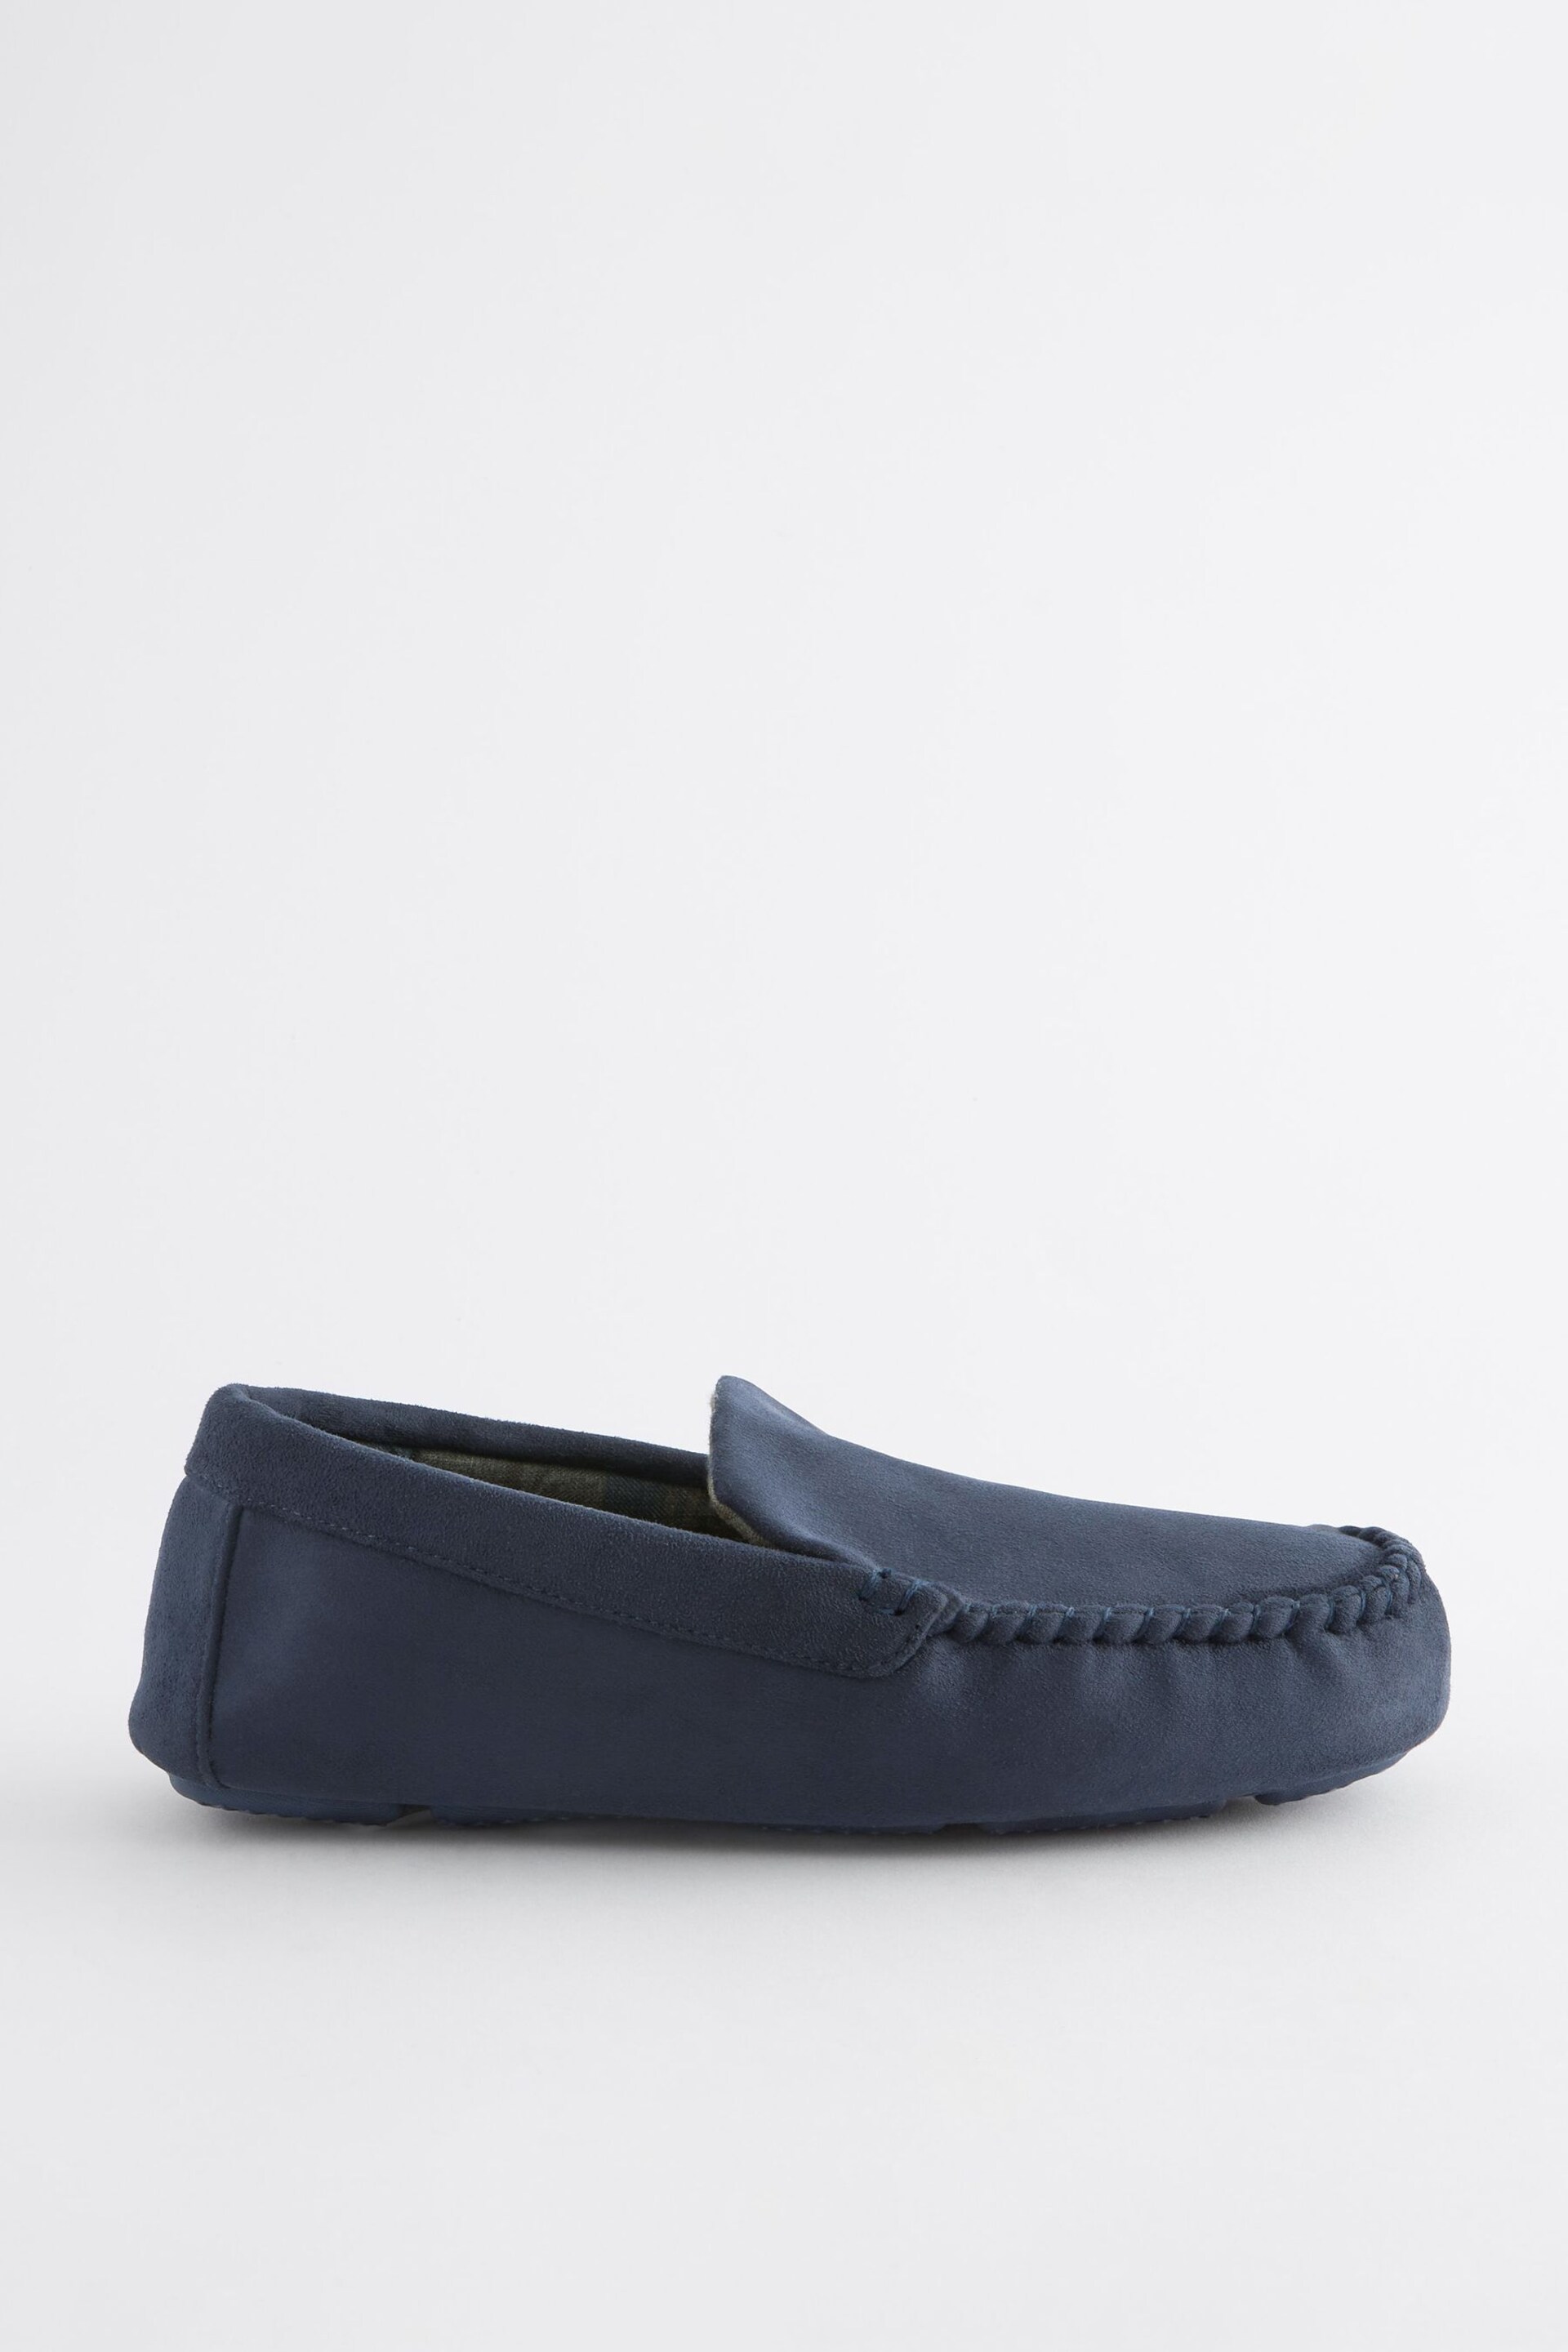 Navy Blue Check Lined Moccasin Slippers - Image 3 of 7